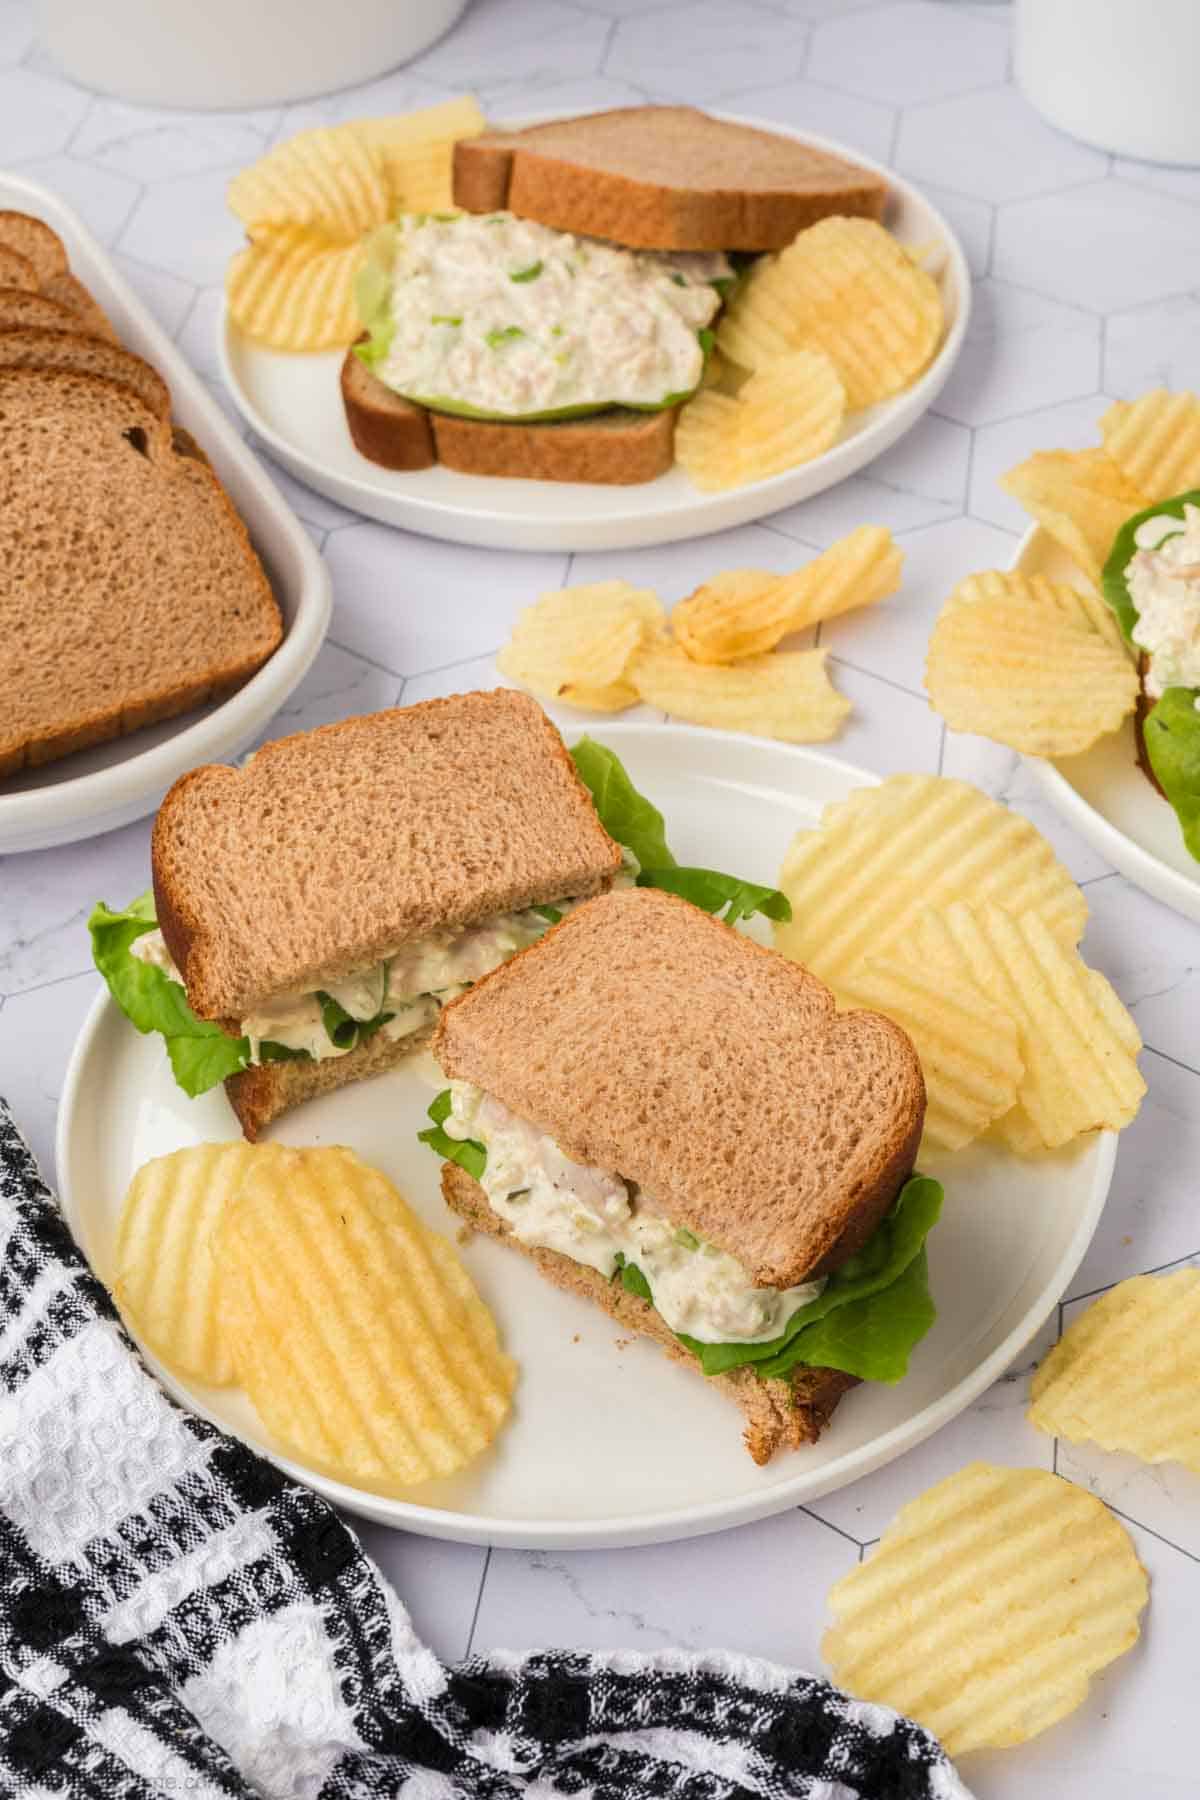 Two plates of chicken salad sandwiches on whole grain bread are served with potato chips. One plate in the foreground includes a black and white checkered napkin, while another plate is in the background, also accompanied by chips. Additional sandwich ingredients, ideal for a tuna salad sandwich recipe, are nearby.